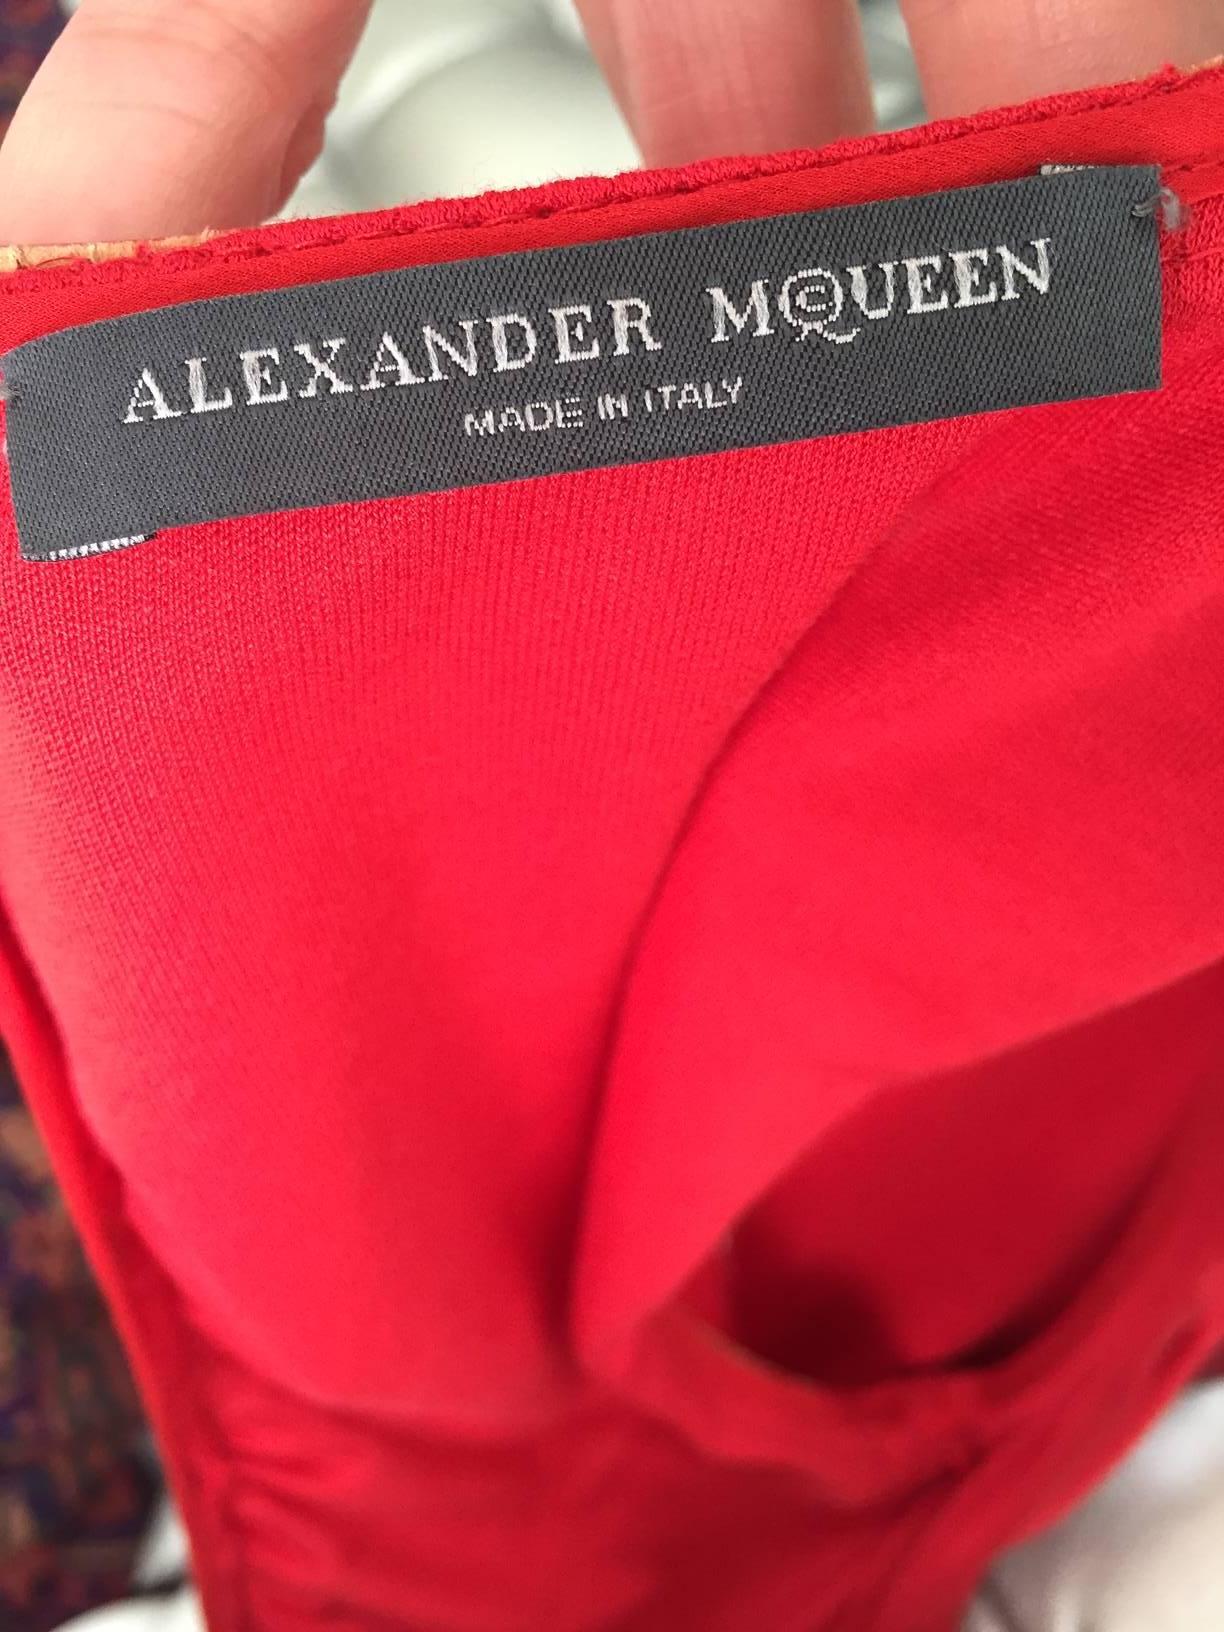 Red Sexy 2003 Alexander McQueen red jersey dress with leather trim